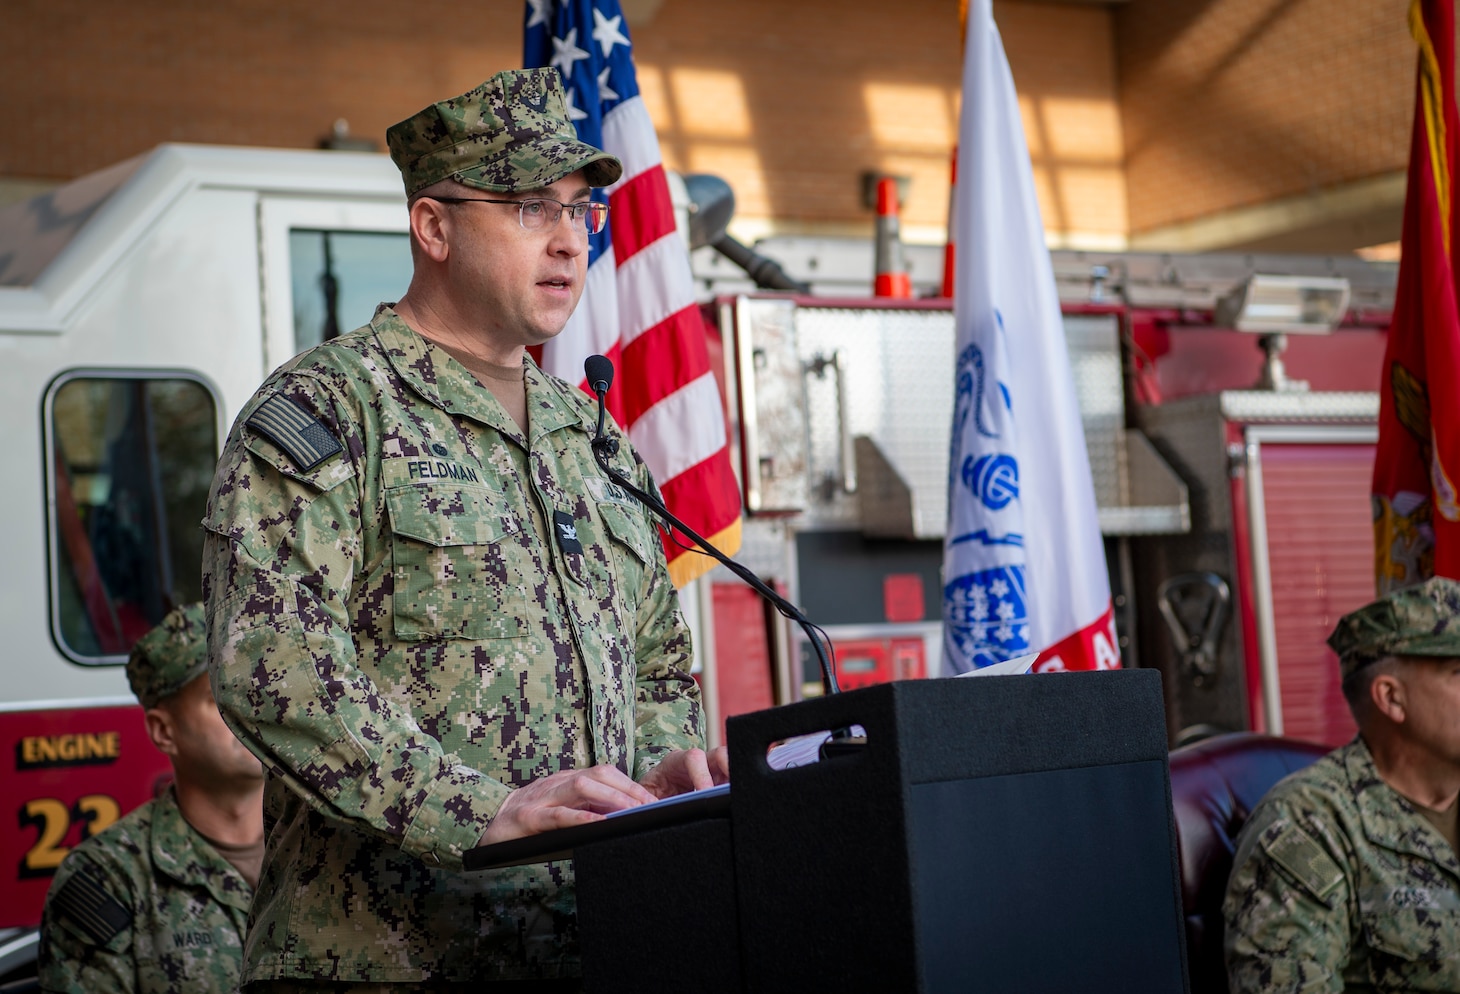 Capt. Brian Feldman, commanding officer, Navy Medicine Readiness & Training Command Portsmouth, and director, Naval Medical Center Portsmouth (NMCP), speaks during a trauma center ribbon cutting ceremony in front of NMCP’s emergency room entrance on Dec. 8.